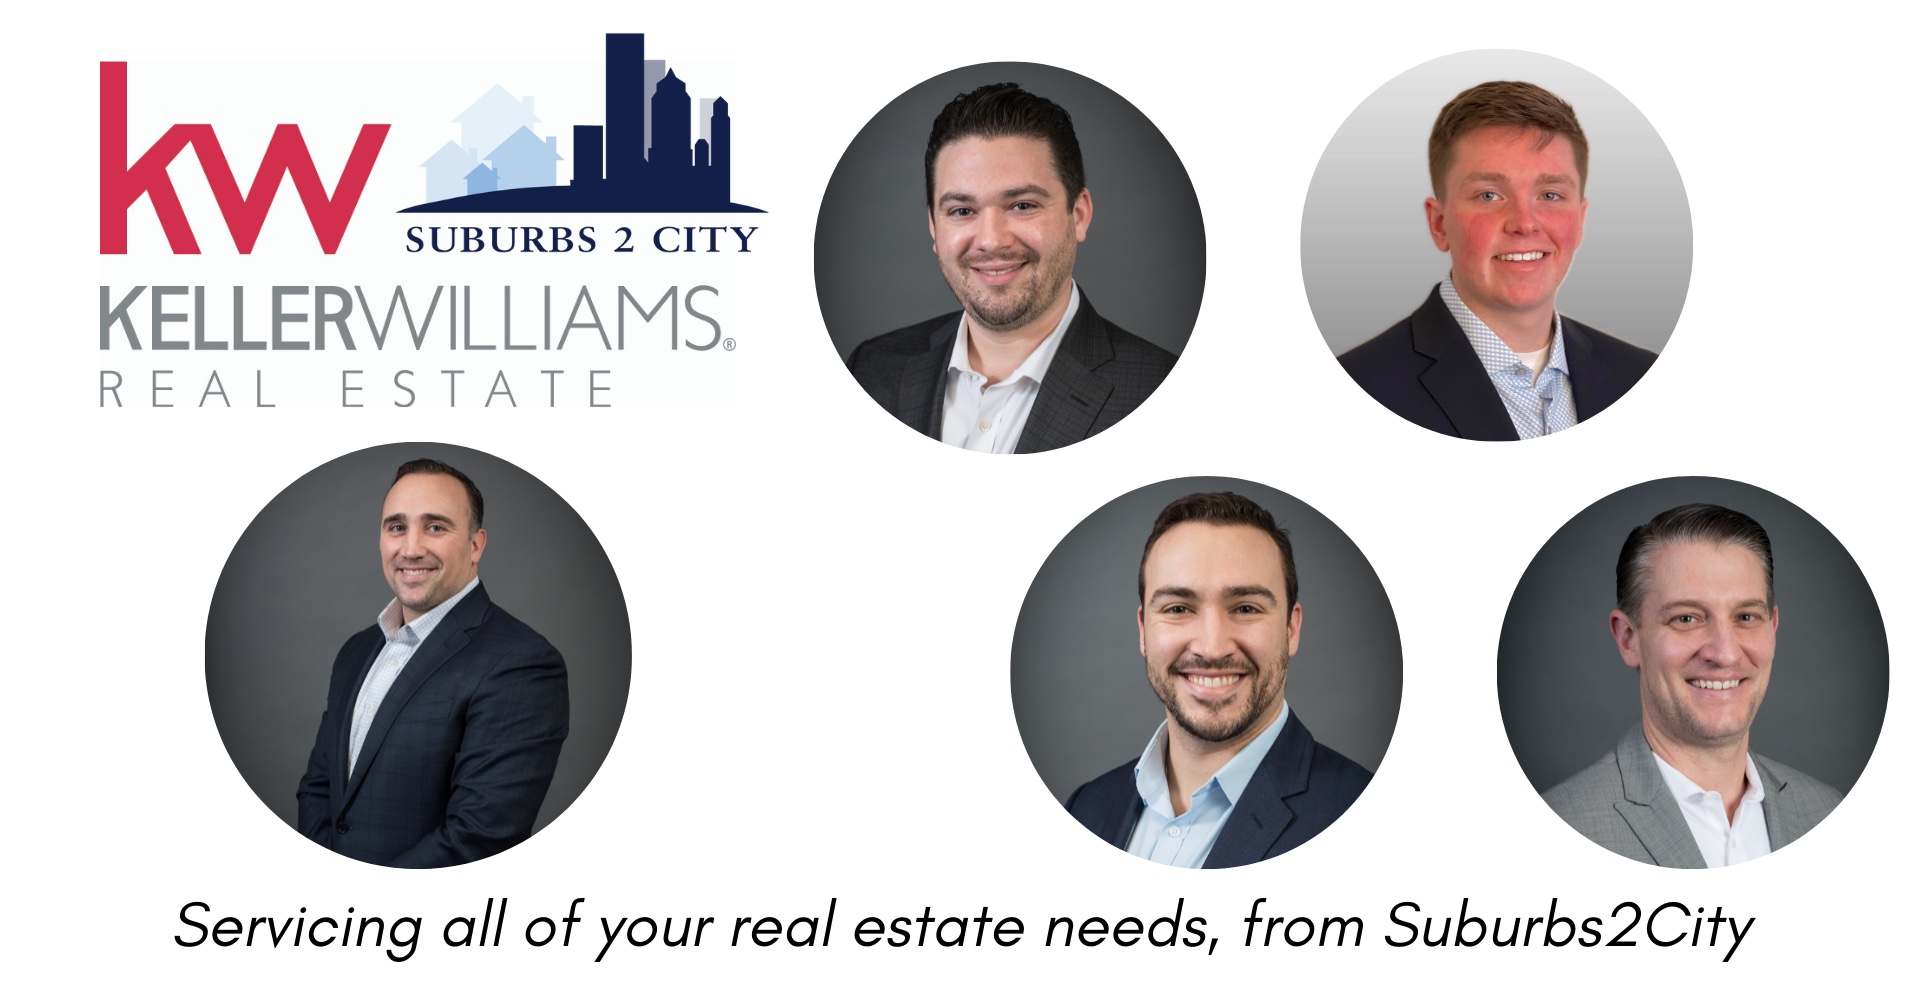 The Suburbs2City Team Servicing all of your real estate needs, from Suburbs2City